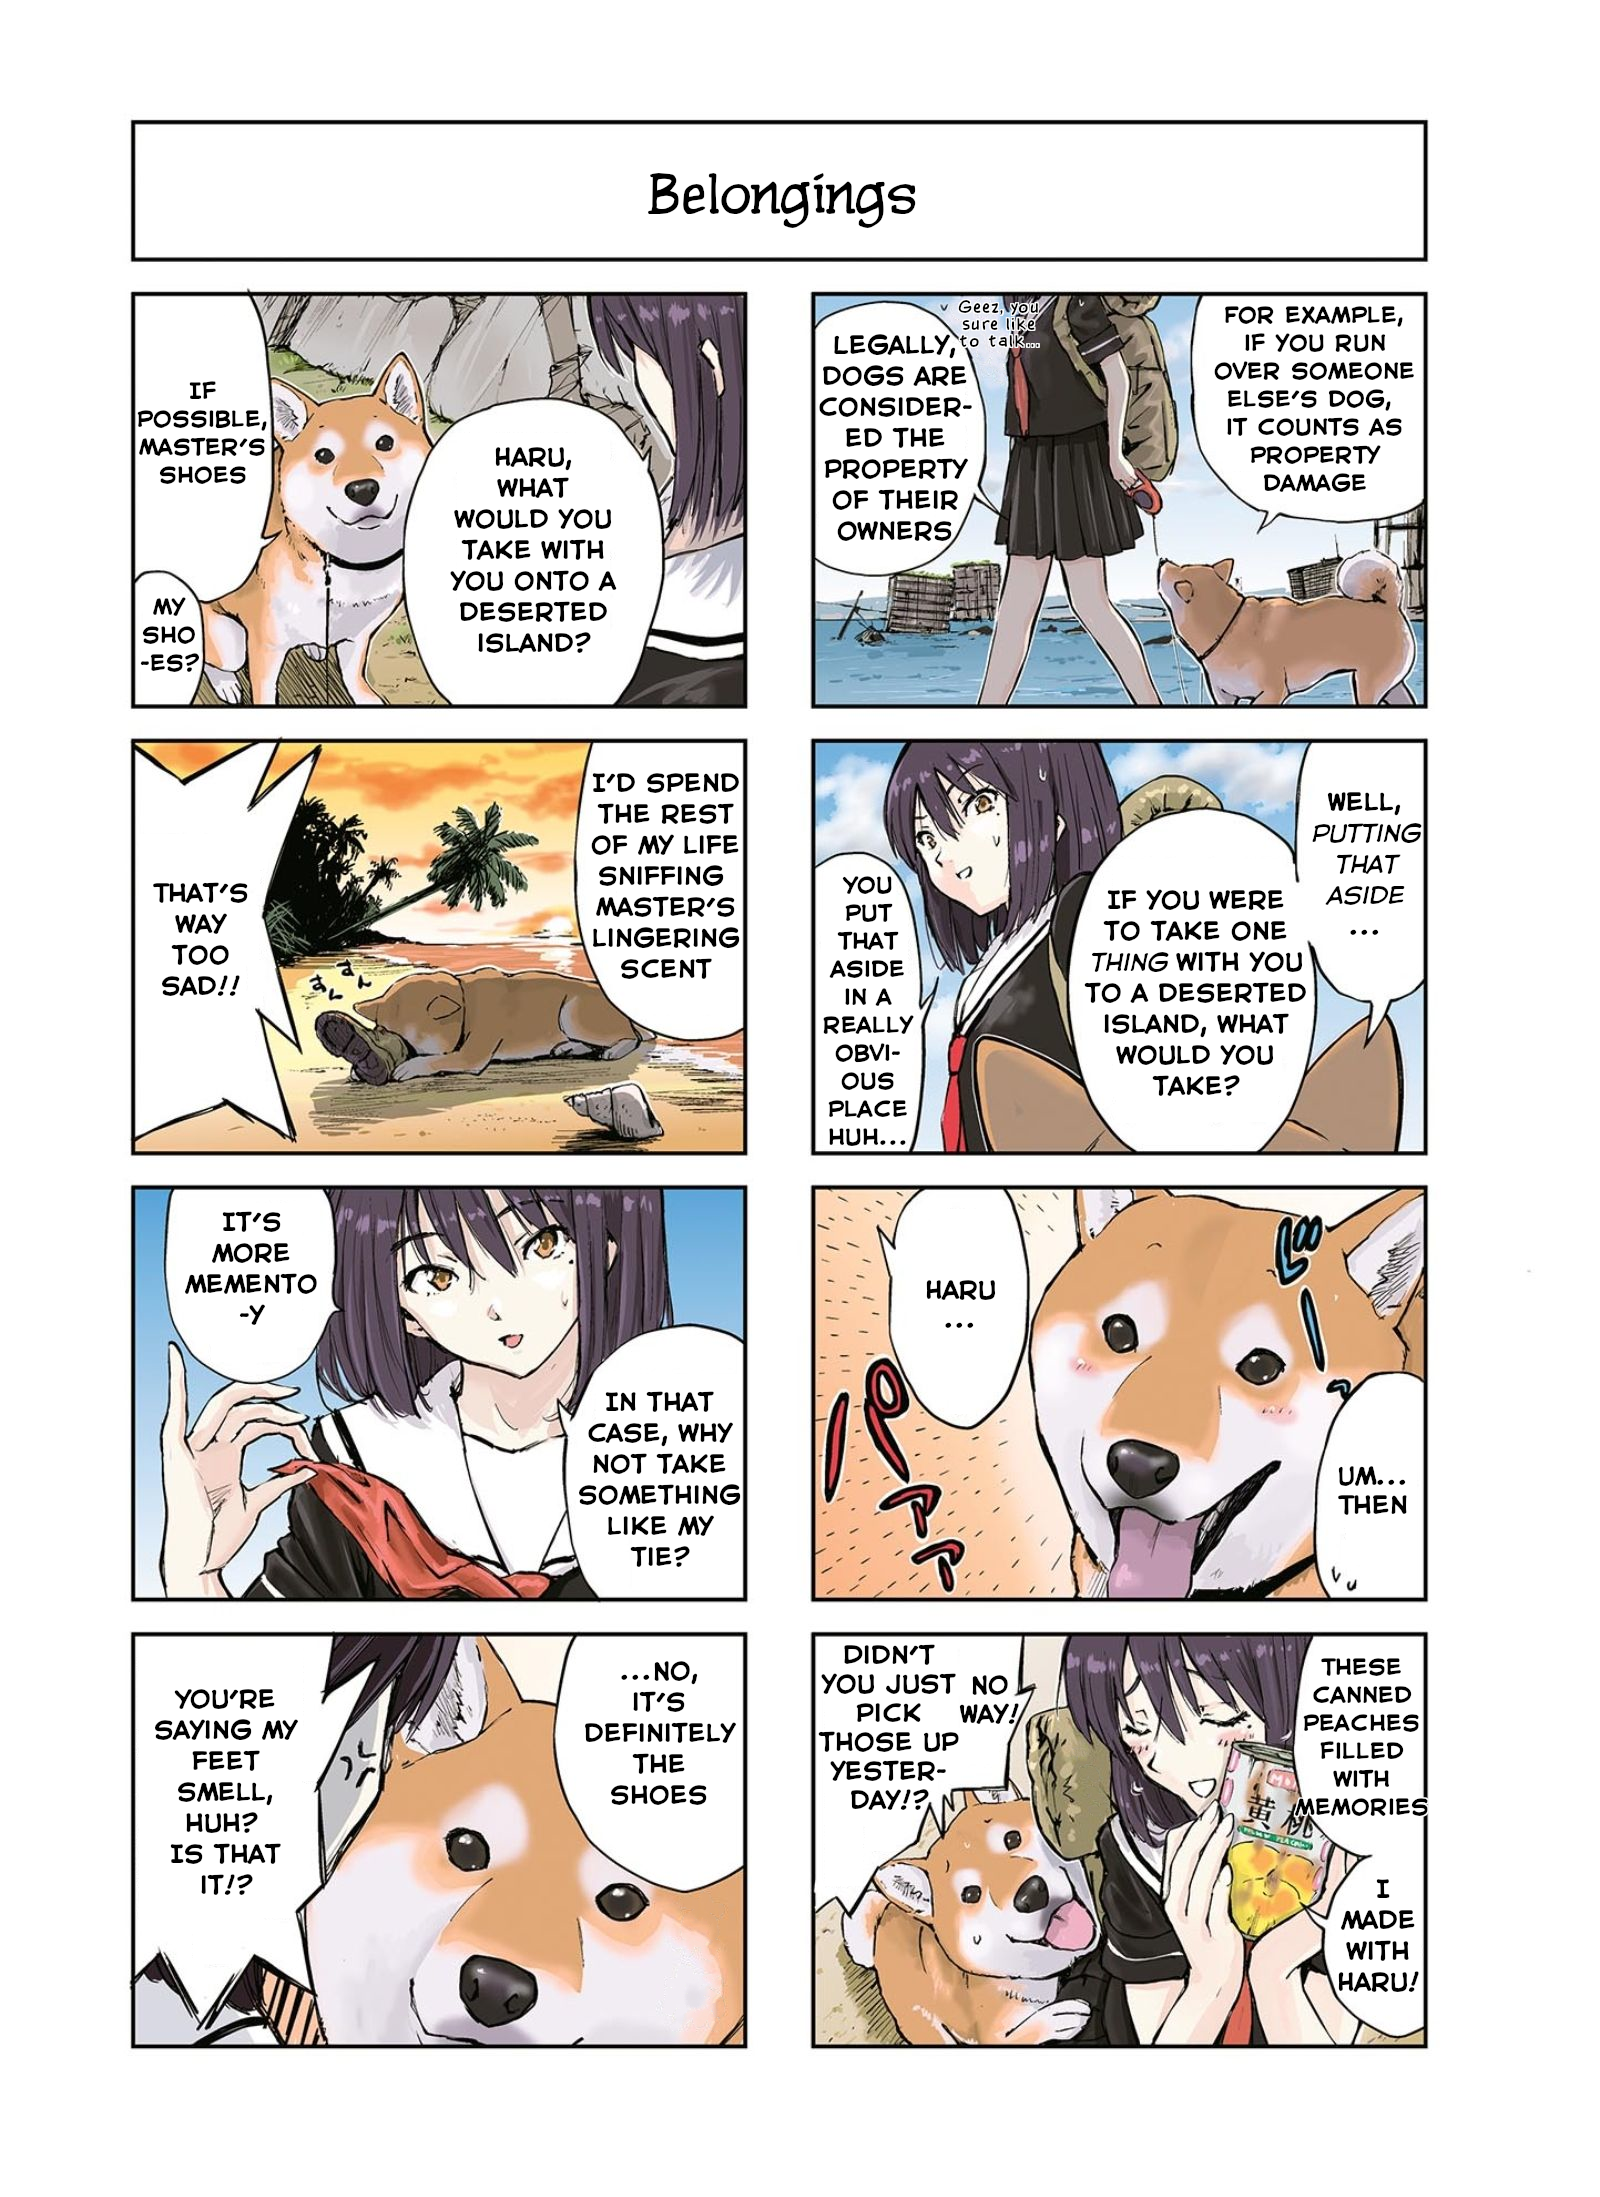 Roaming The Apocalypse With My Shiba Inu - chapter 14 - #4